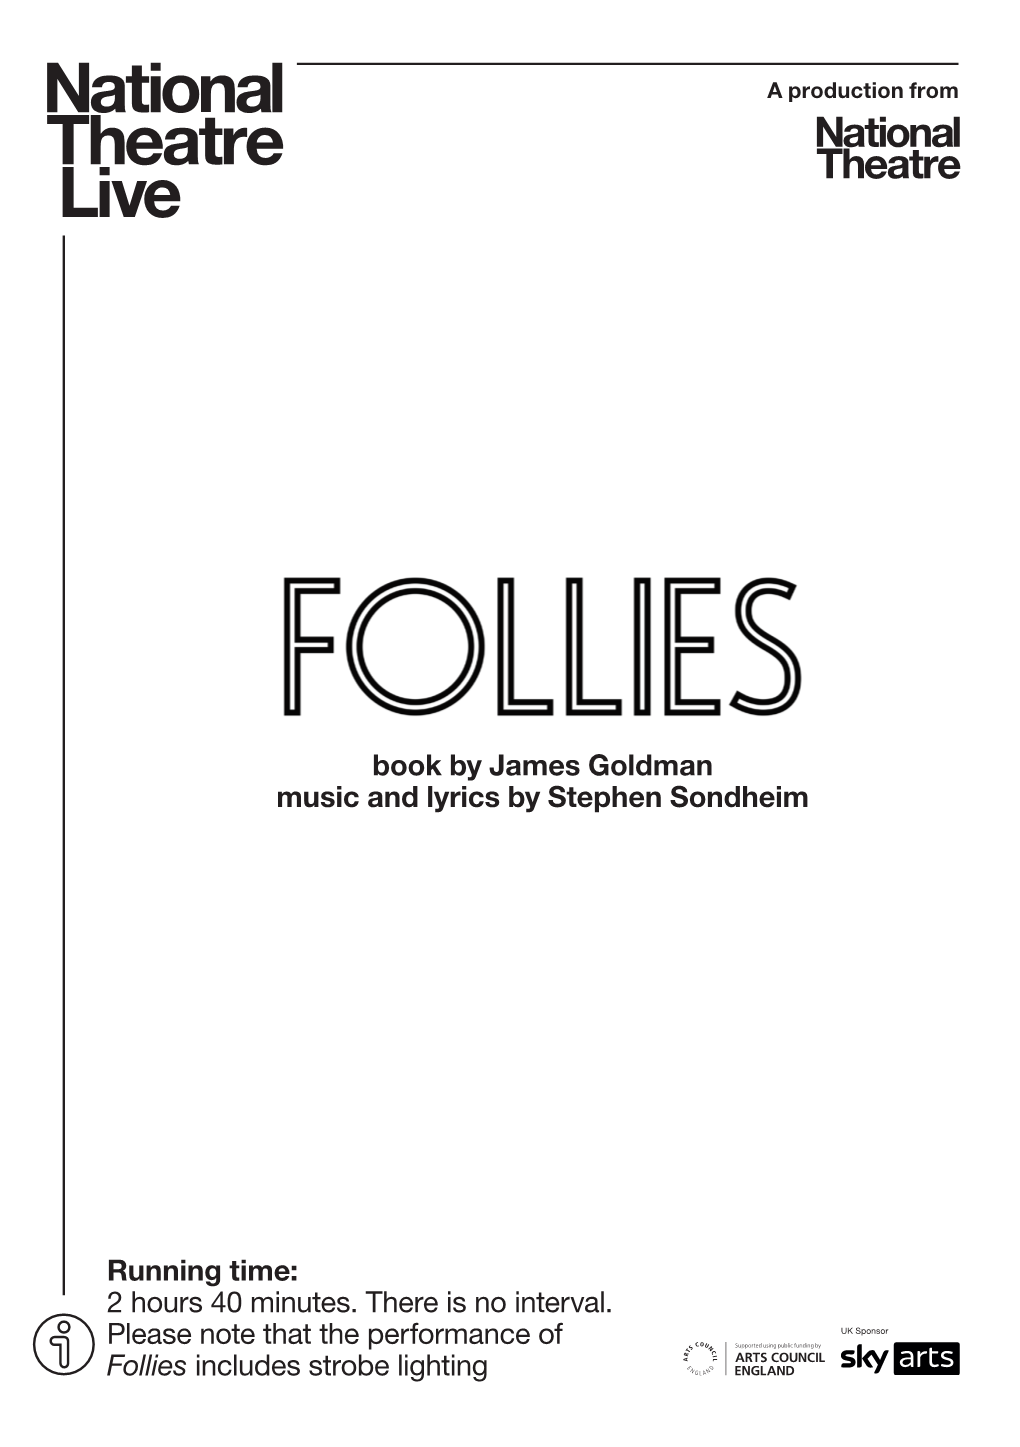 National Theatre Live Screening of Follies